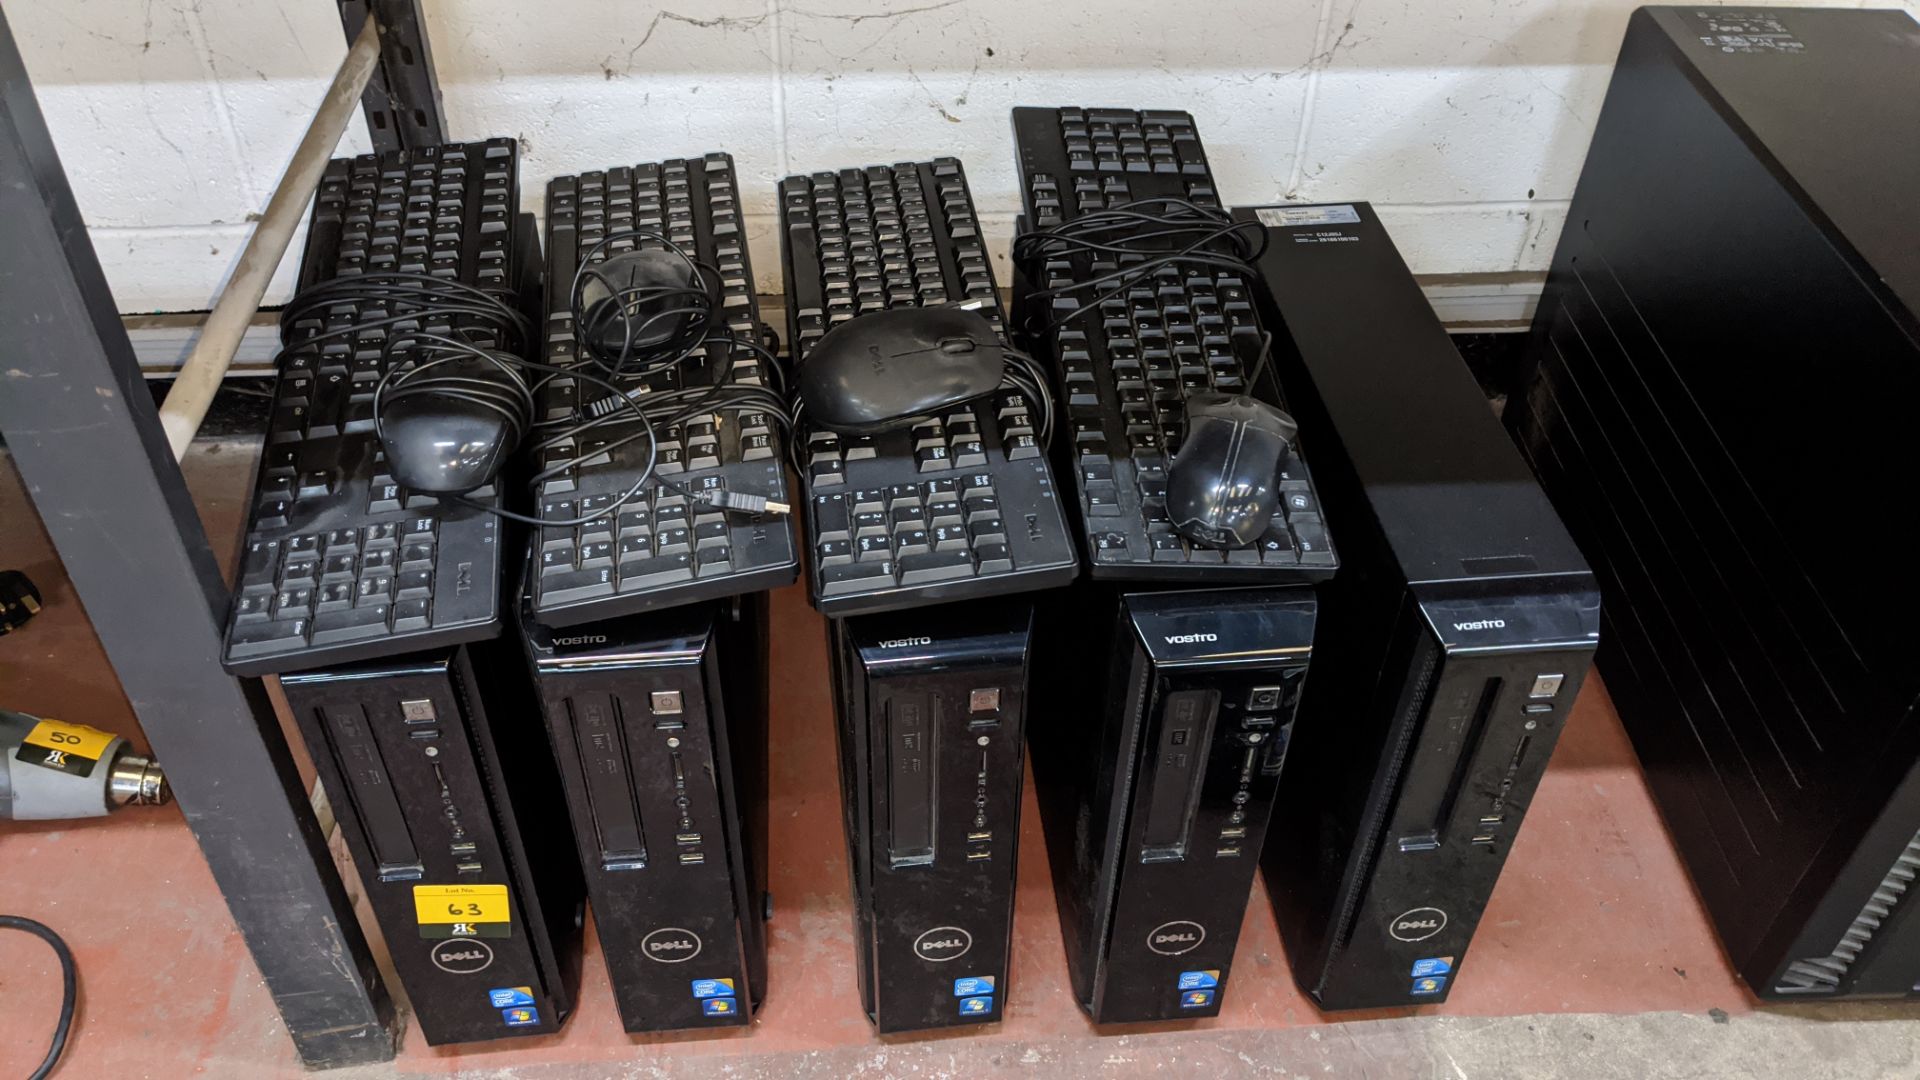 5 off Dell Vostro desktop computers, including 4 keyboards & 4 mice. NB the hard drives have been - Image 2 of 3